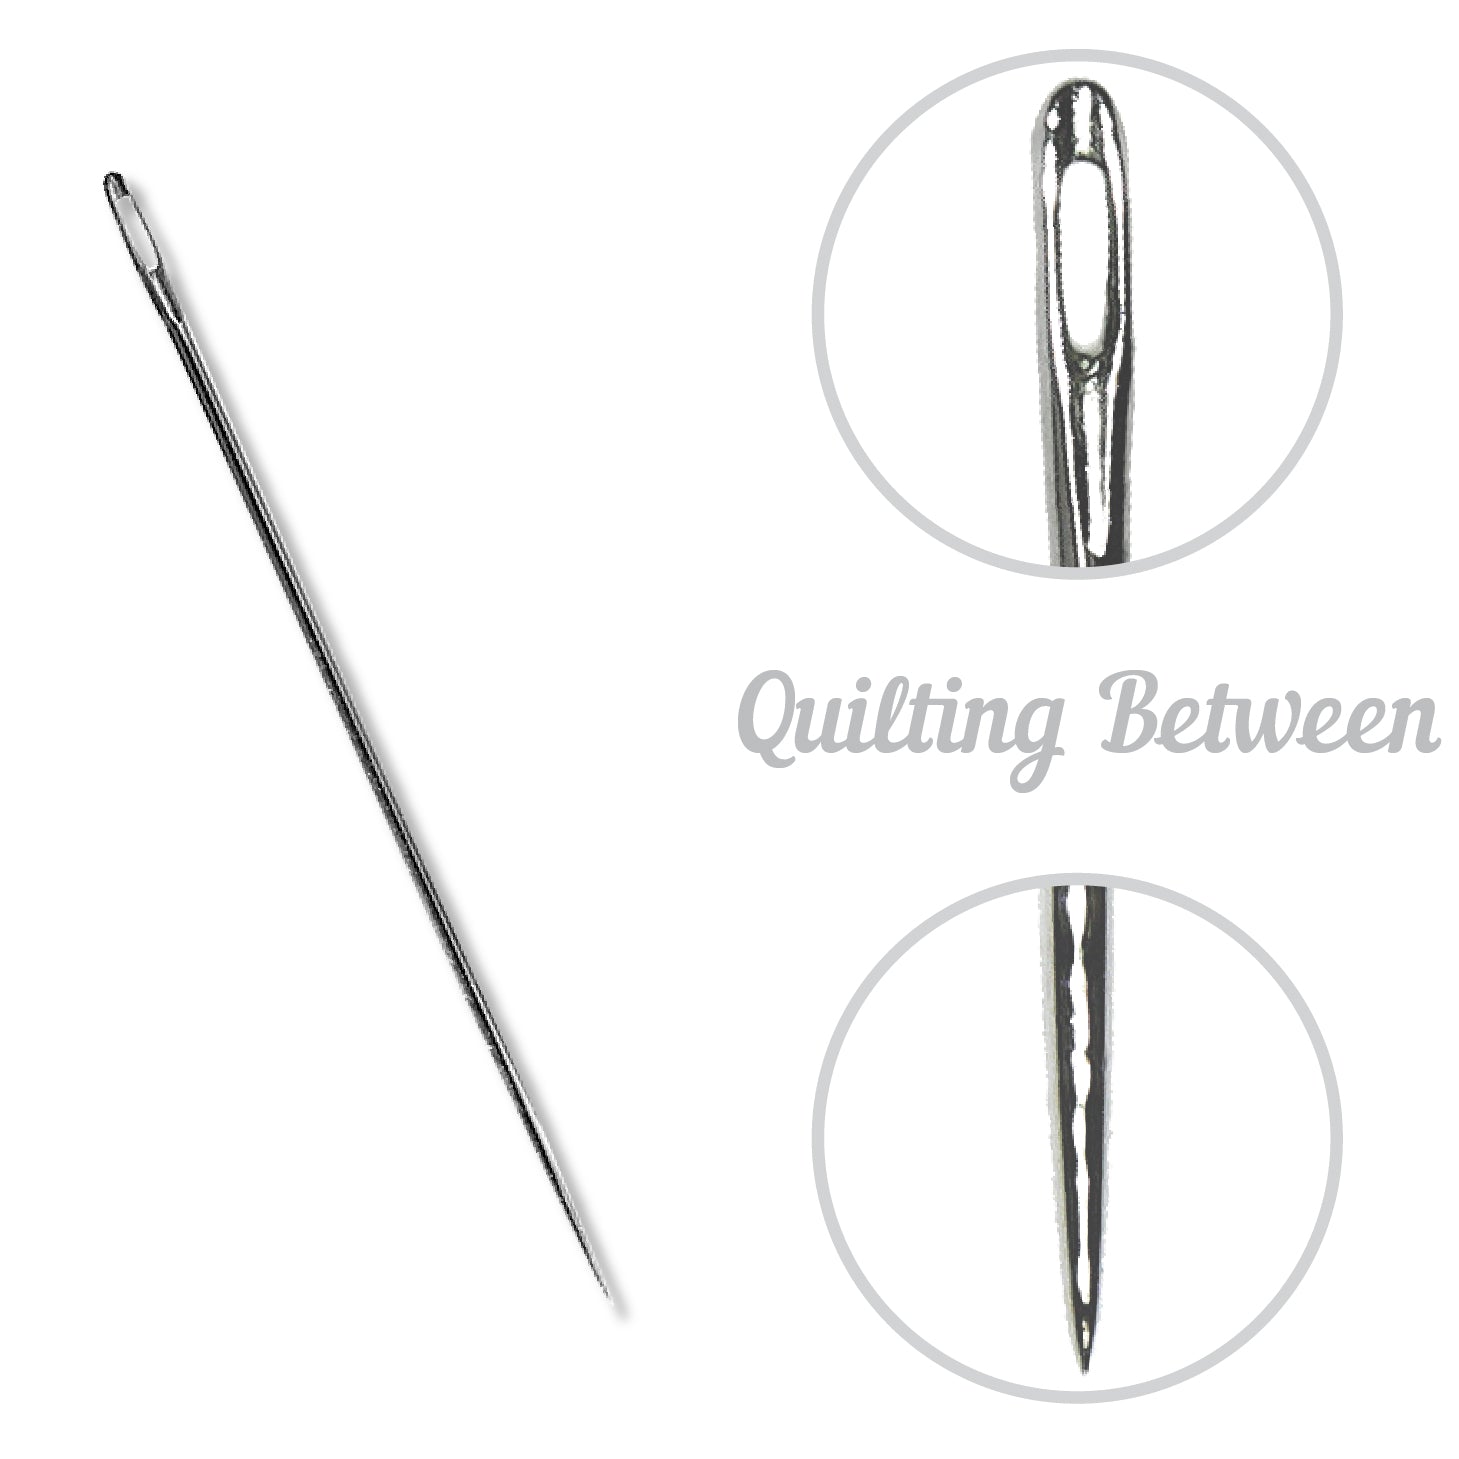 JJ Quilting - Stainless Steel